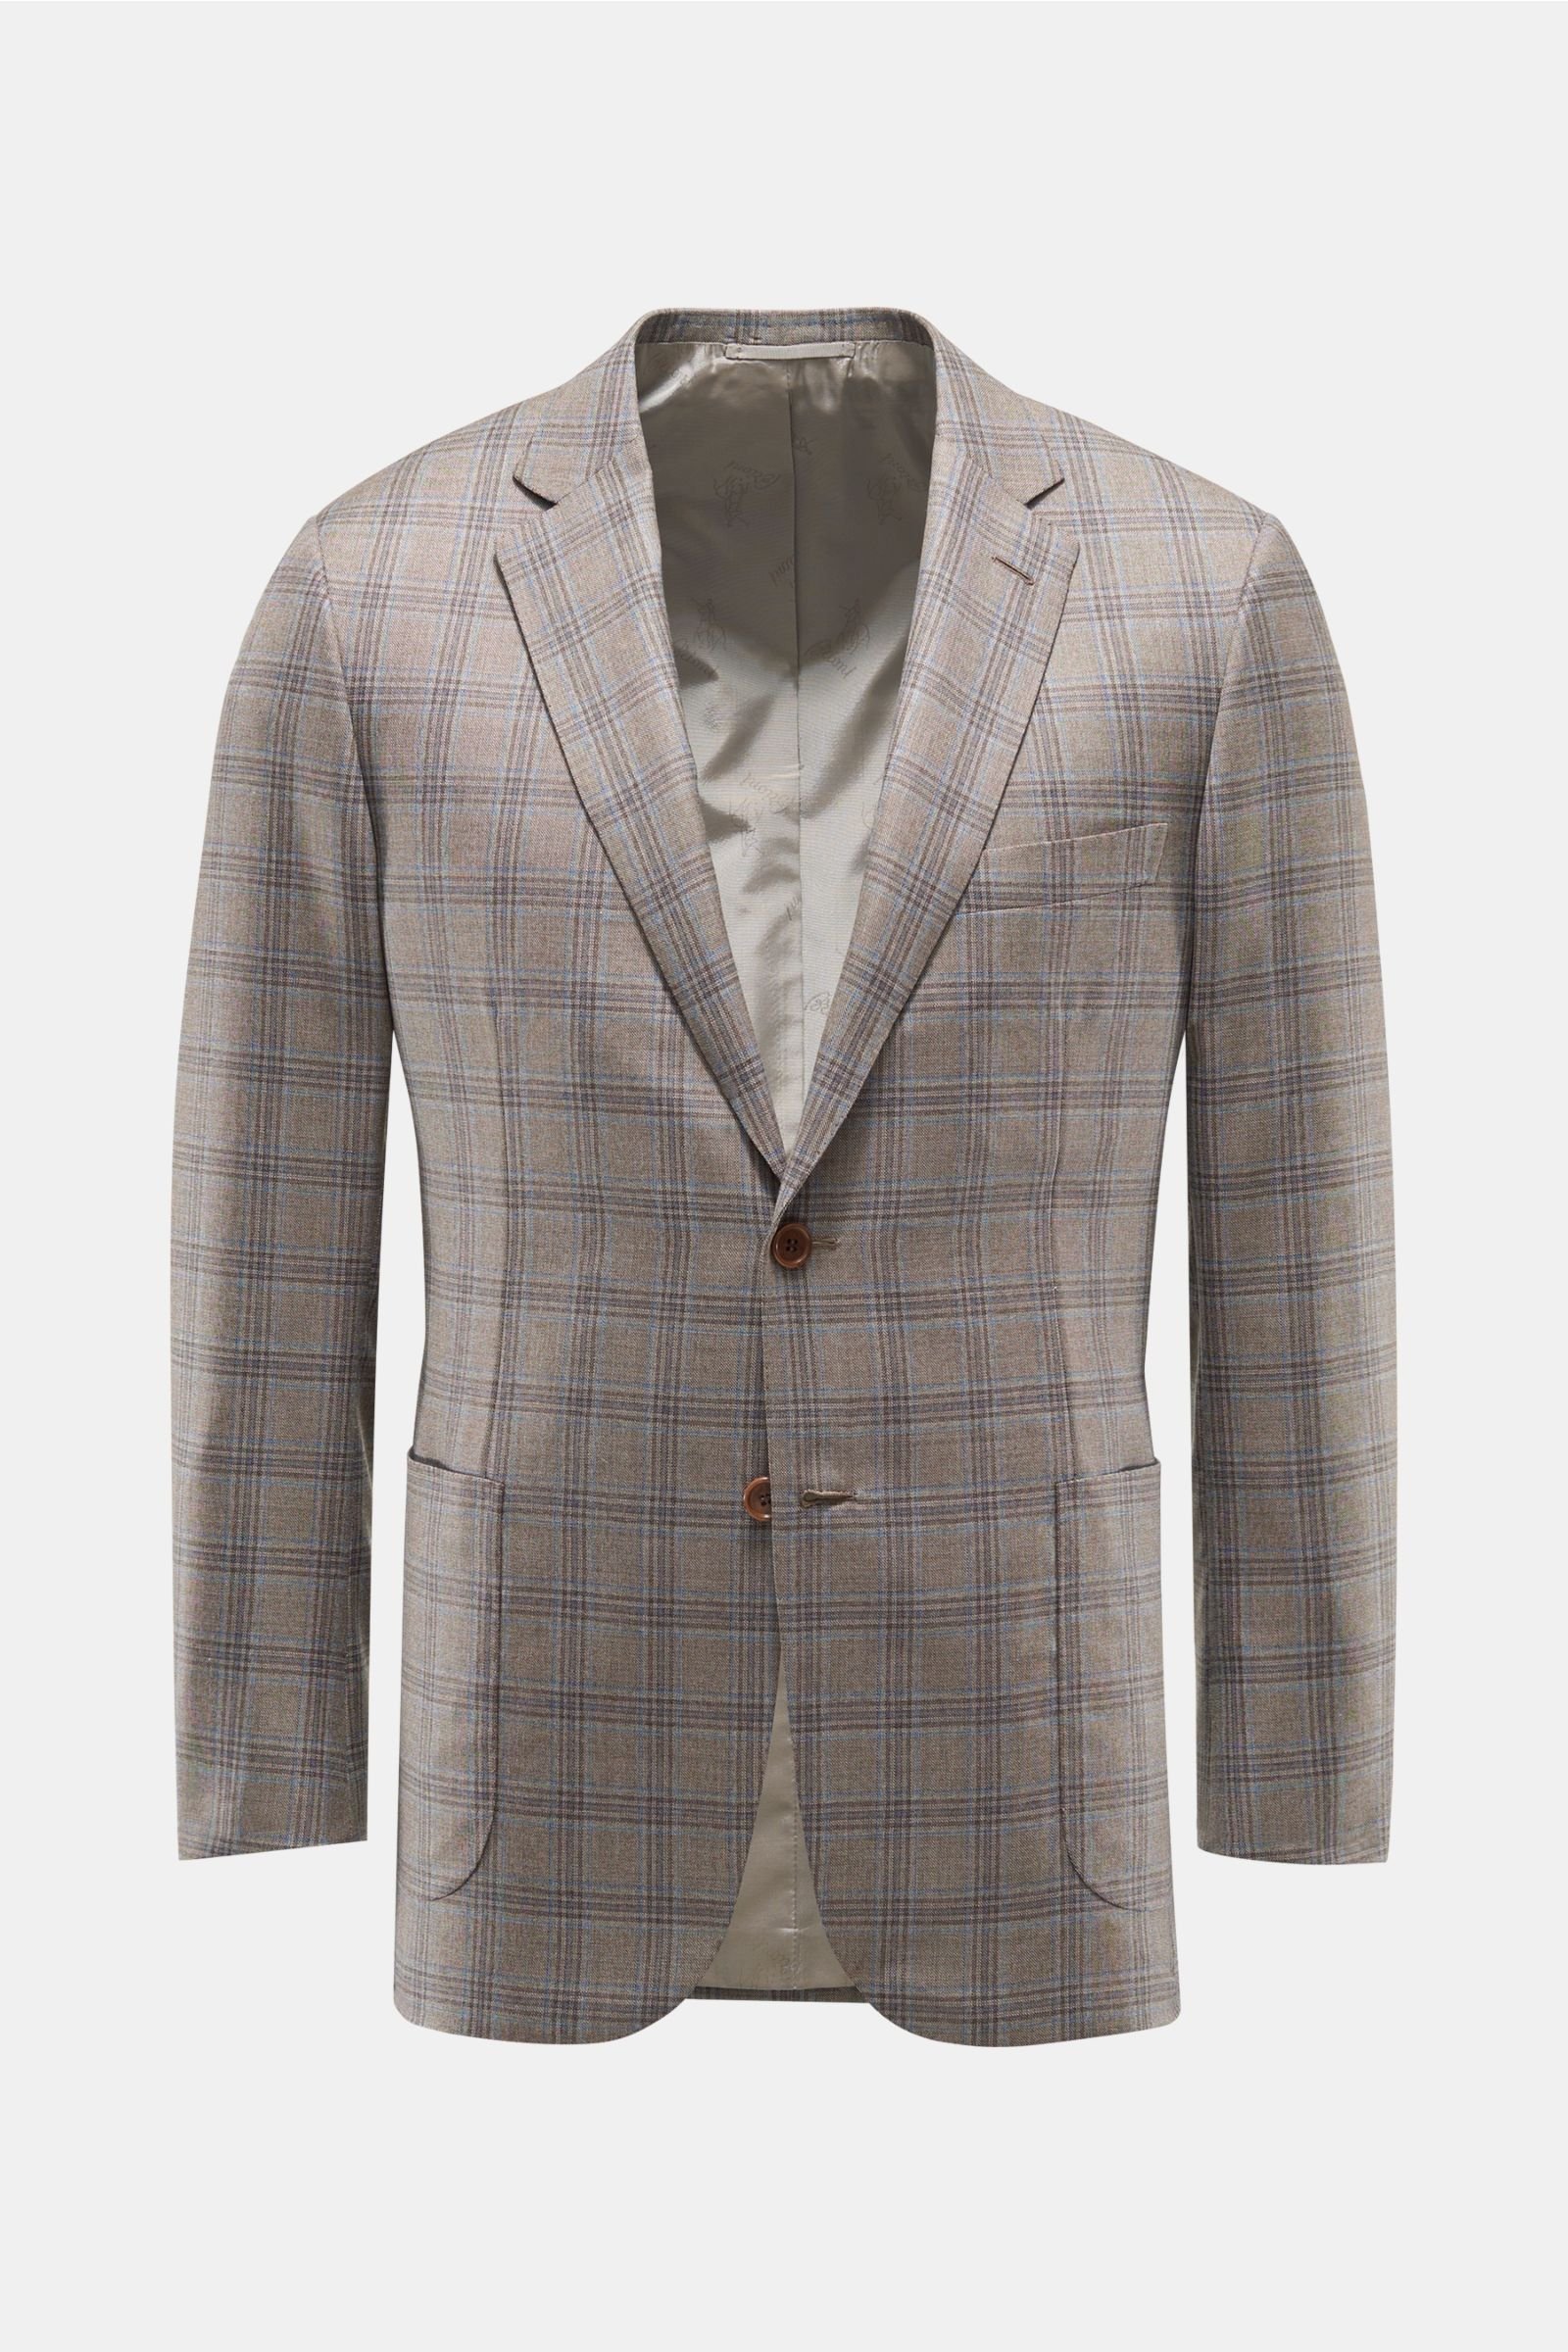 Smart-casual jacket 'Brunico' grey-brown/blue checked